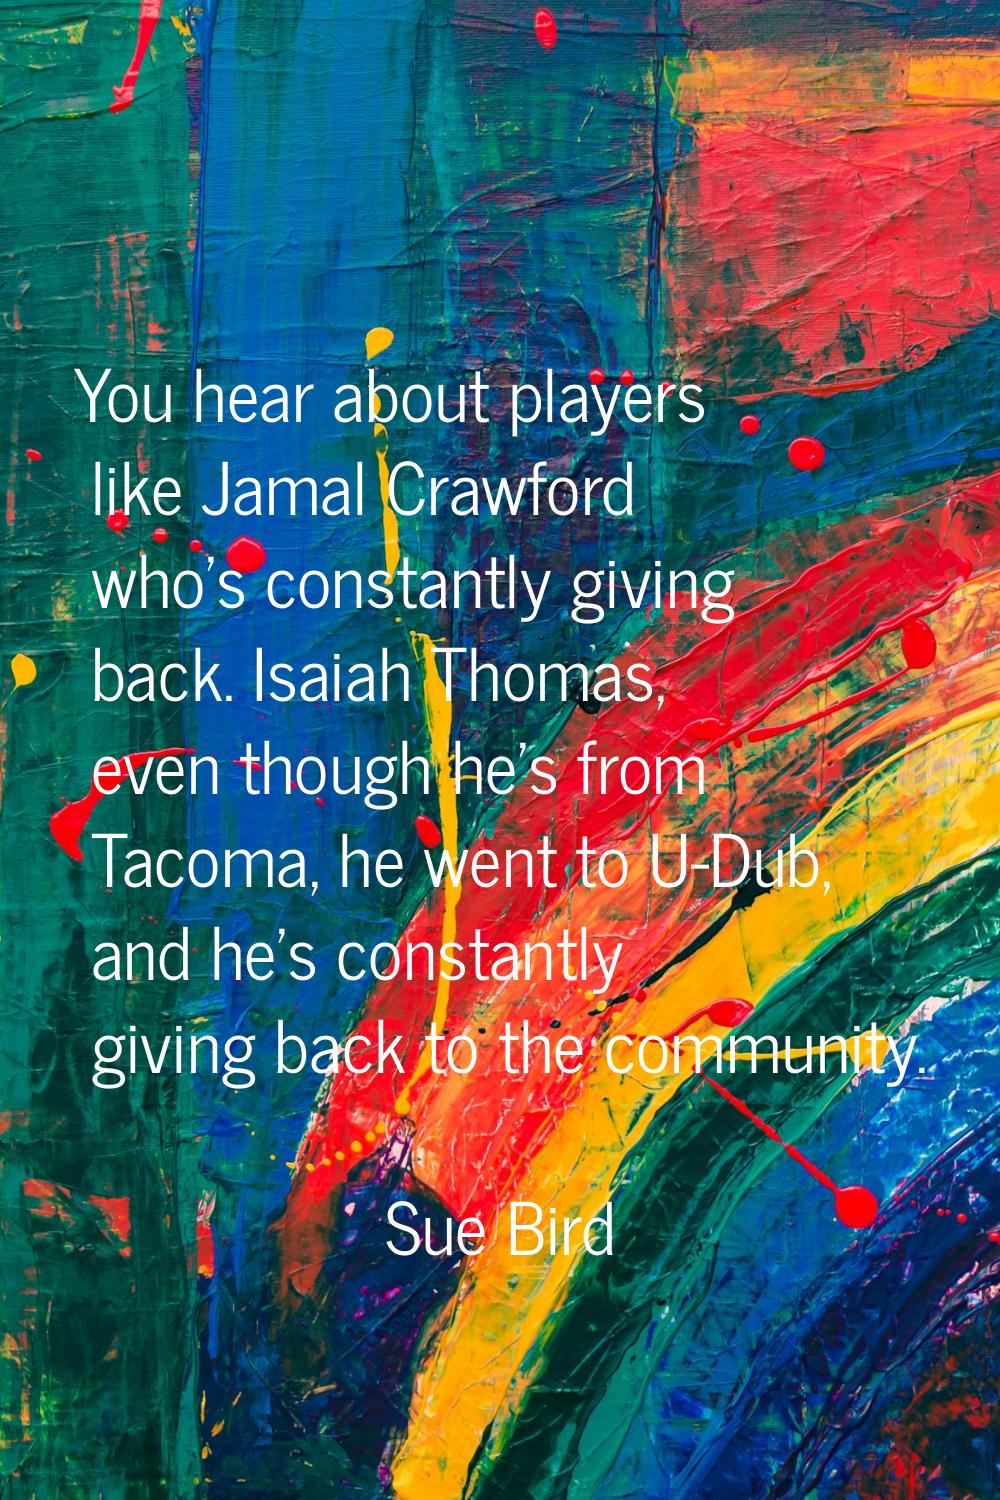 You hear about players like Jamal Crawford who's constantly giving back. Isaiah Thomas, even though